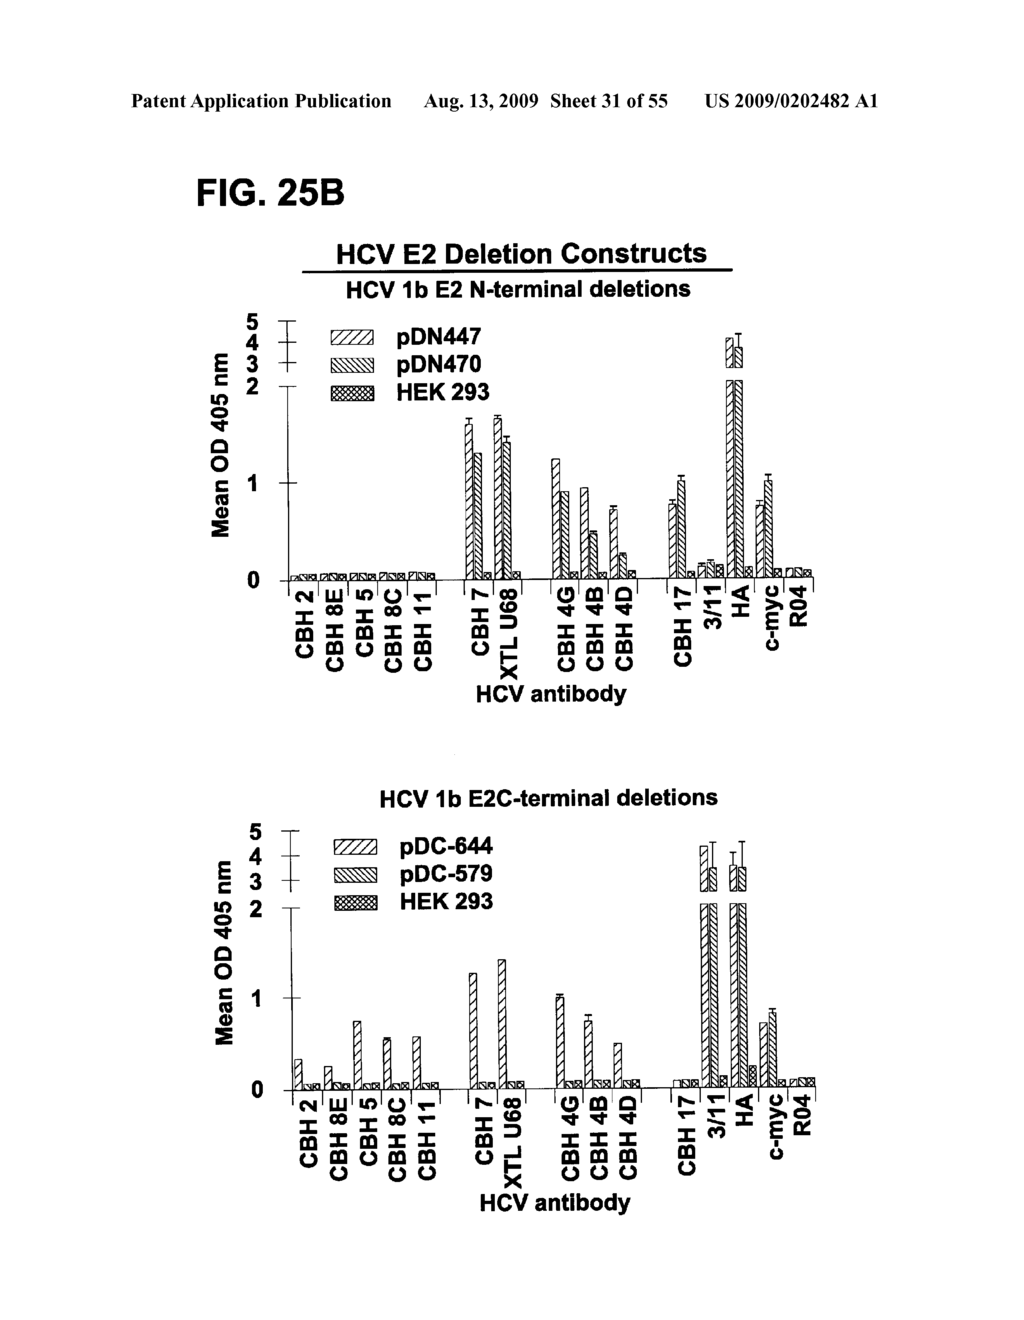 Prevention and Treatment of HCV Infection Employing Antibodies Directed Against Conformational and Linear Epitopes - diagram, schematic, and image 32